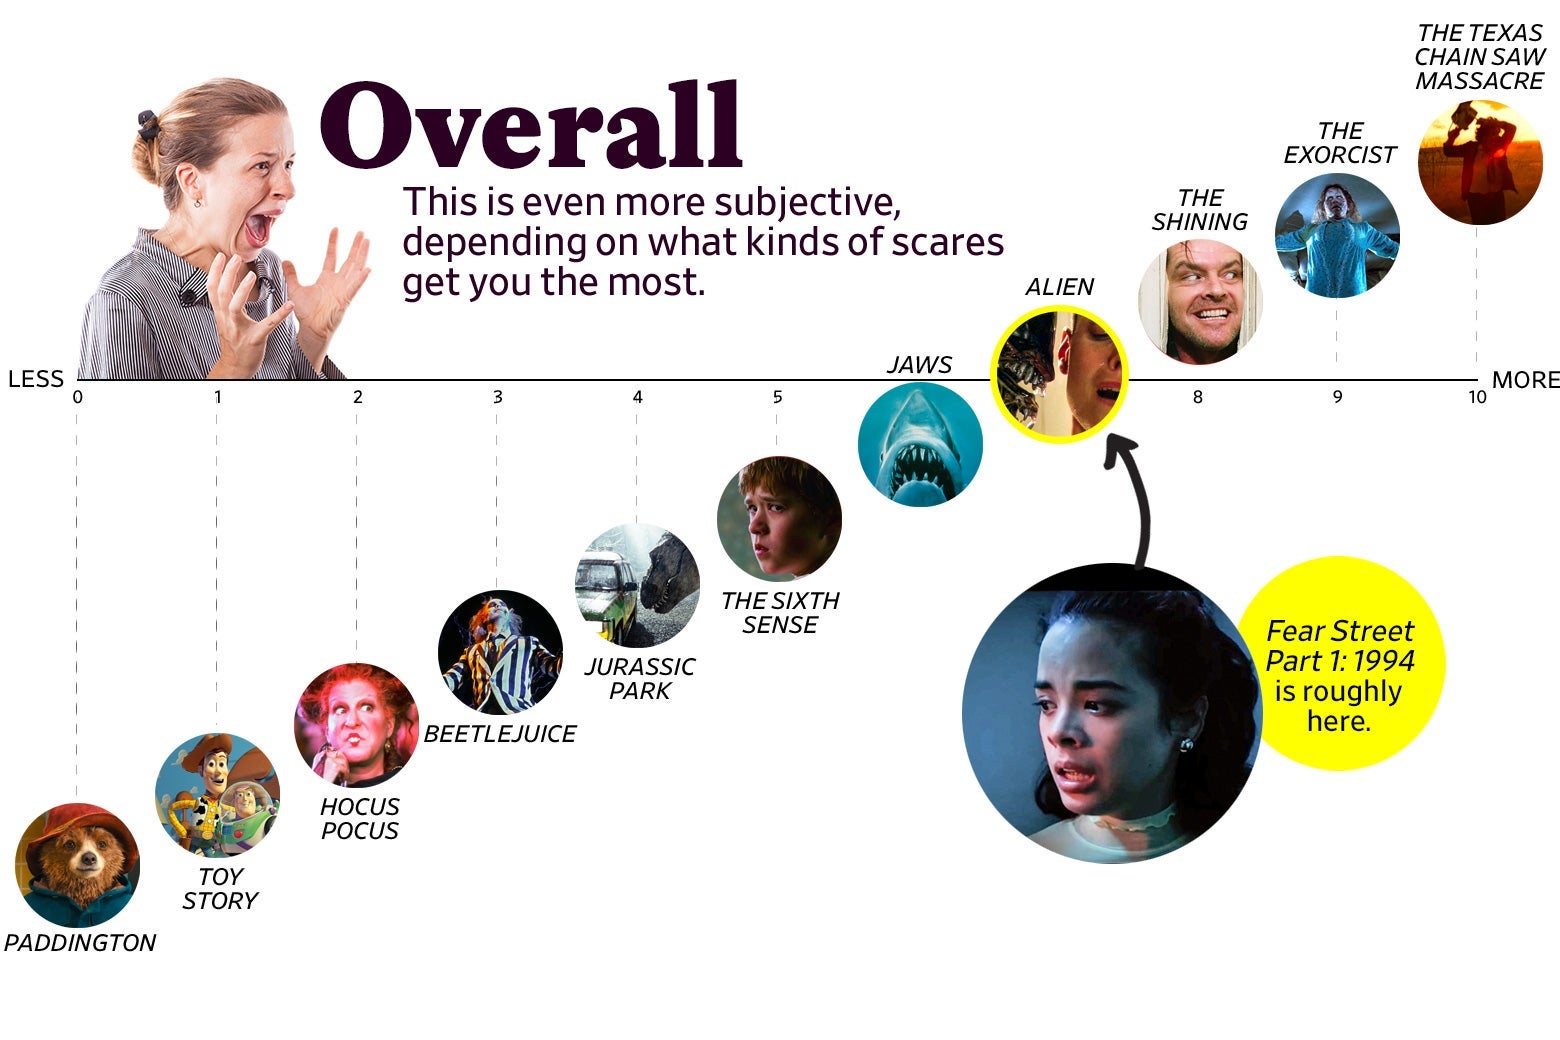 A chart titled “Overall: This is even more subjective, depending on what kinds of scares get you the most” shows that Fear Street ranks as a 7 overall, roughly the same as Alien. The scale ranges from Paddington (0) to the original Texas Chain Saw Massacre (10).